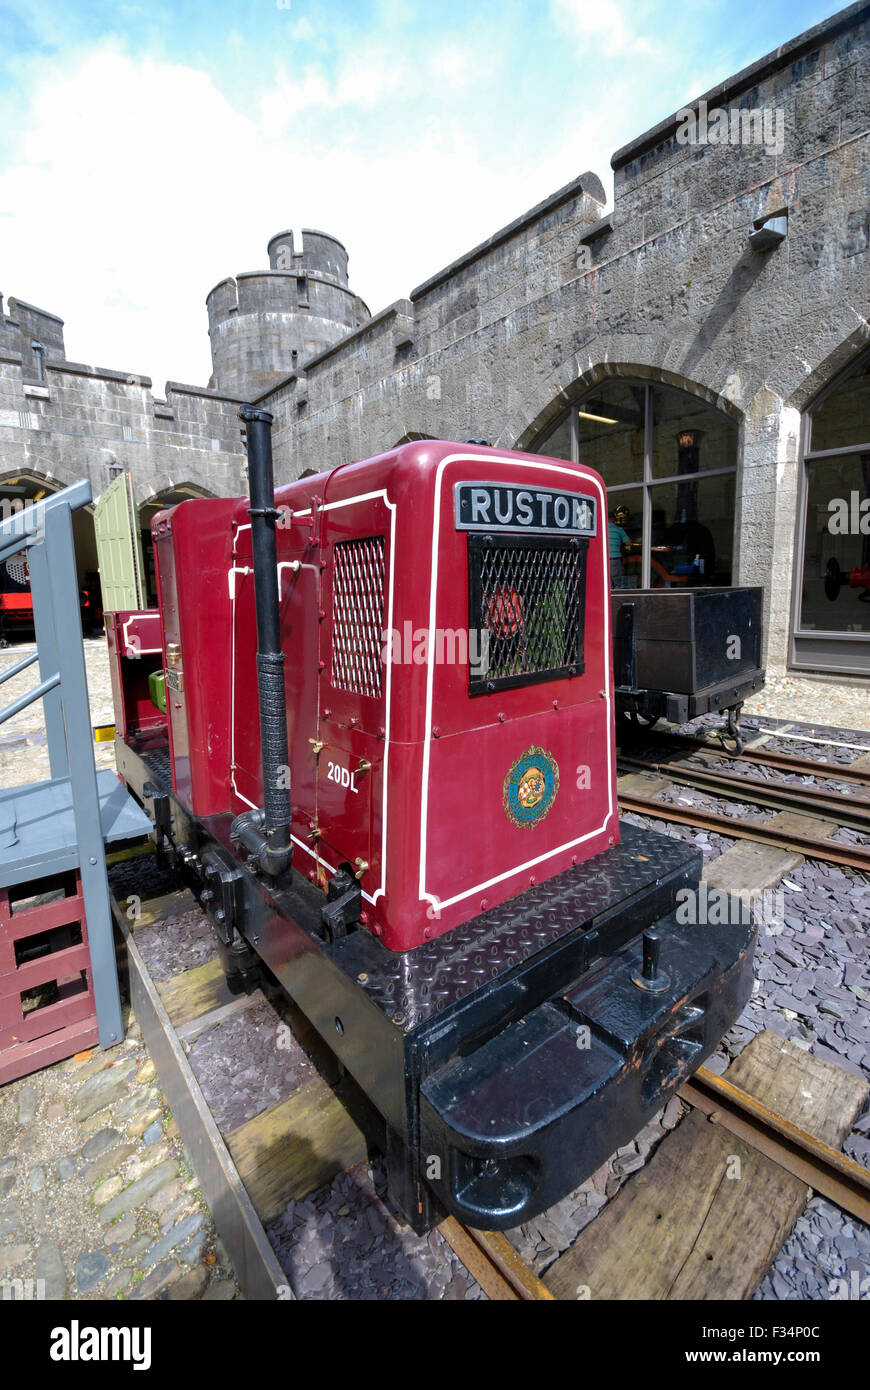 A historic Ruston 2 cylynder narrow gauge diesel locomotive used for hauling slate. The small train engine is on display at Penrhyn Castle in Wales Stock Photo